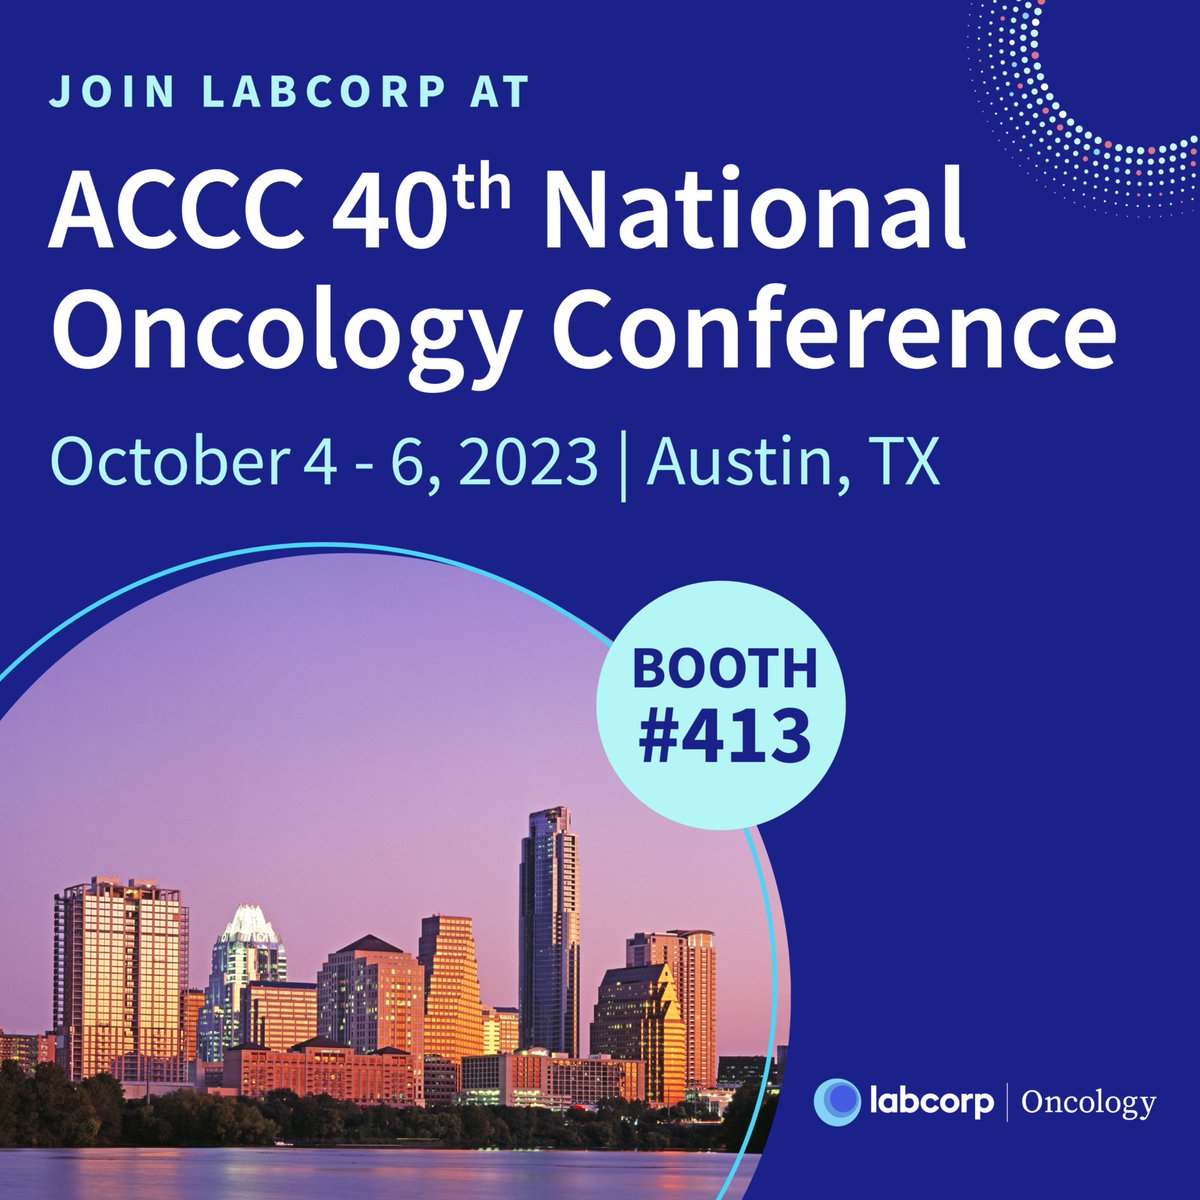 Join us at the ACCC 40th National Oncology Conference Congress in Austin, Texas. Stop by booth 413 to discover how we're improving access to #biomarker testing in the community setting. Labcorp Oncology is powering better decisions in oncology. #ACCCNOC